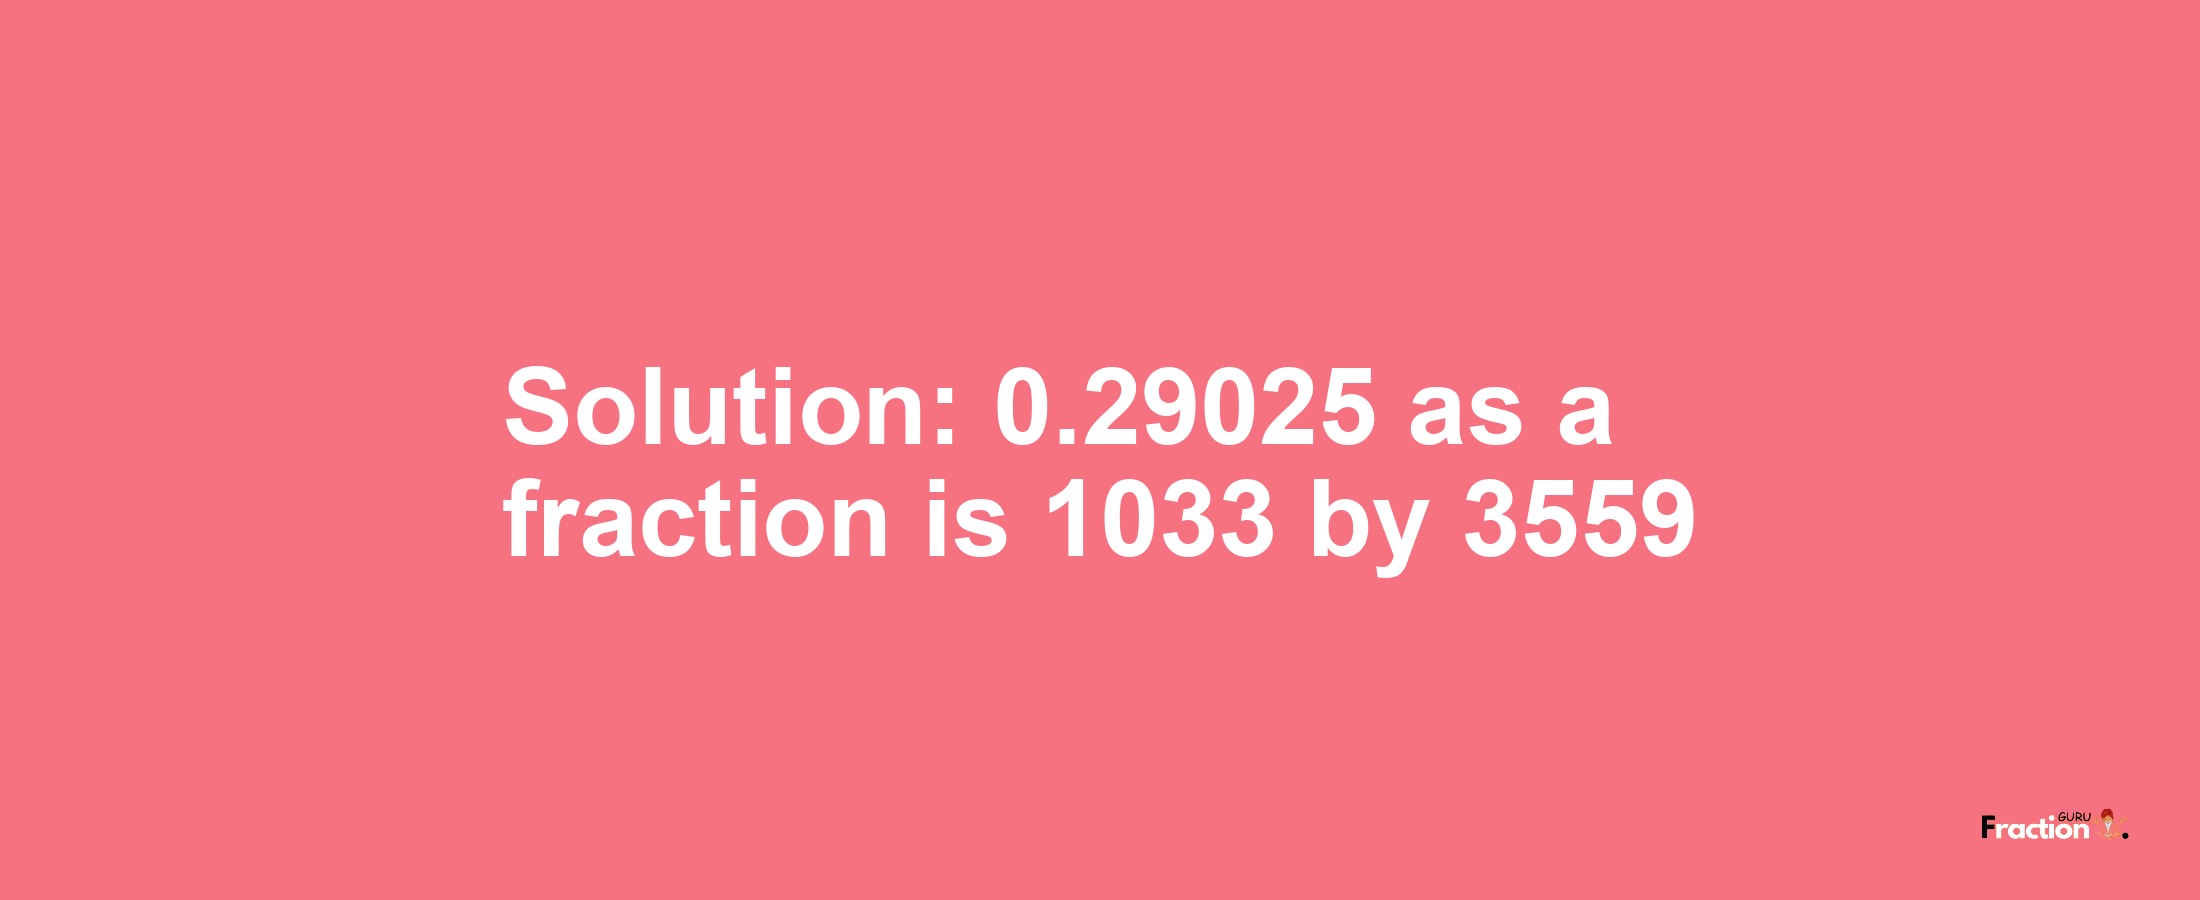 Solution:0.29025 as a fraction is 1033/3559